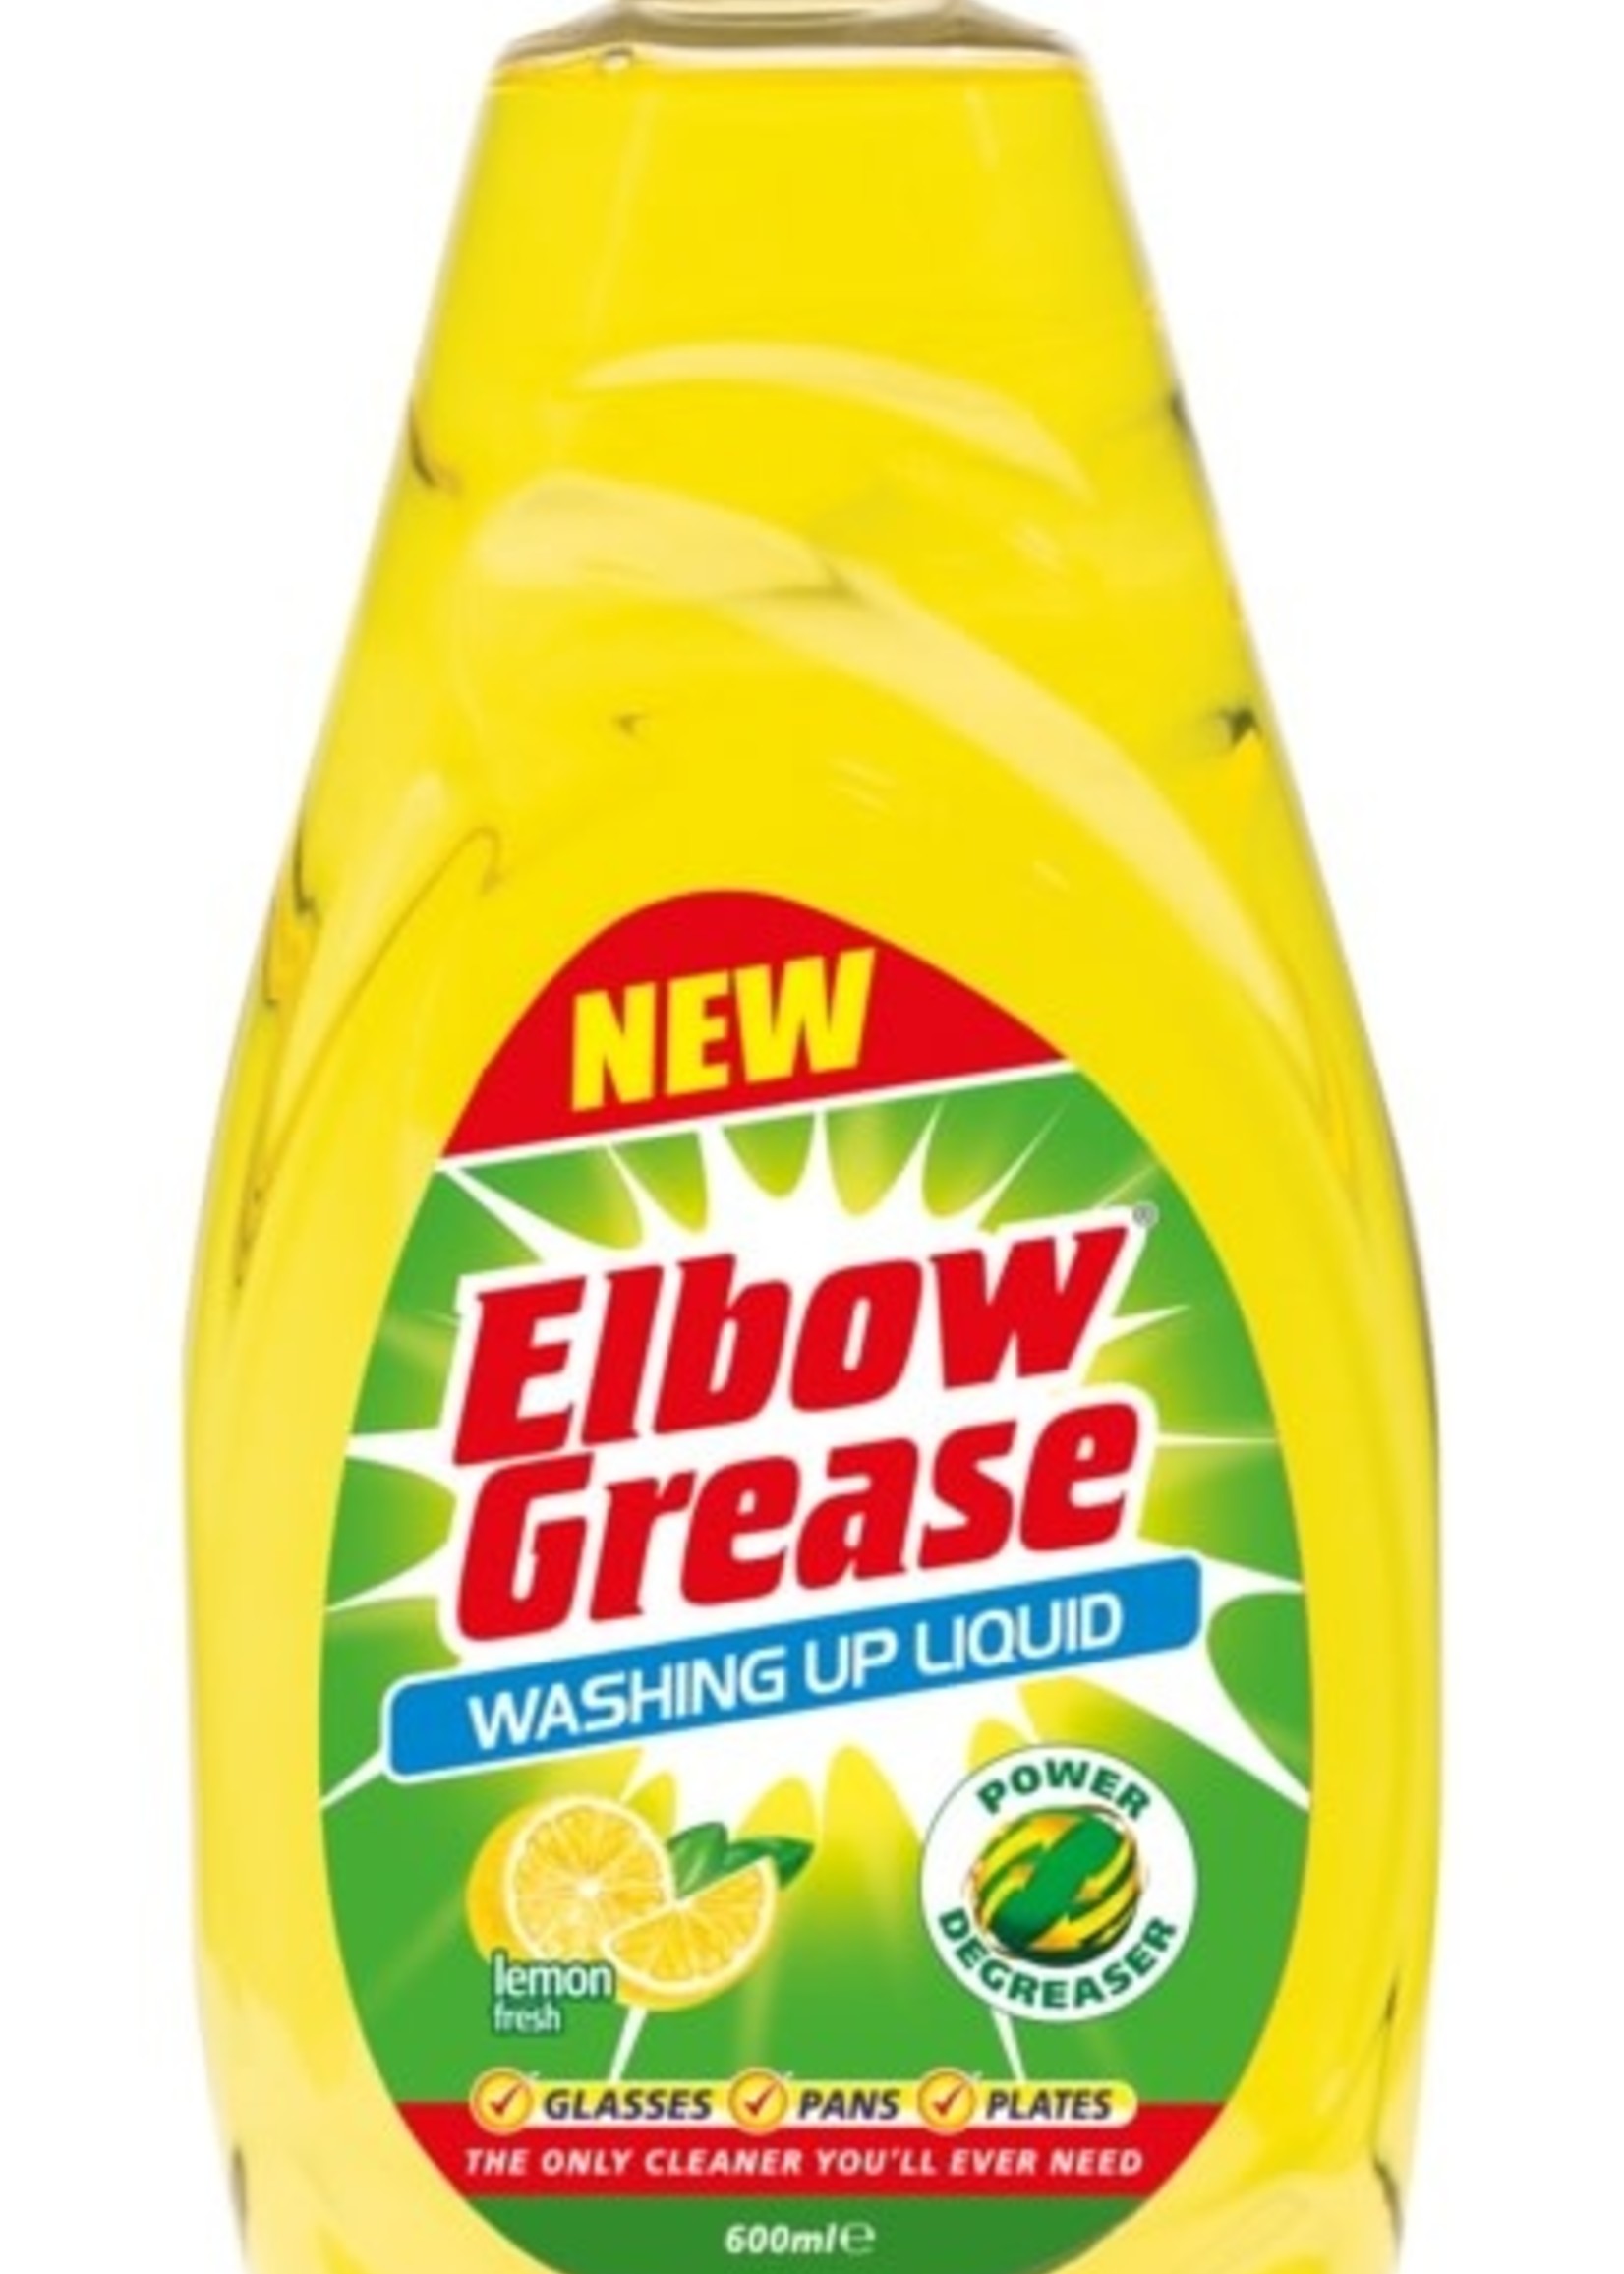 Elbow Grease Elbow Grease Washing Up Liquid 600ml